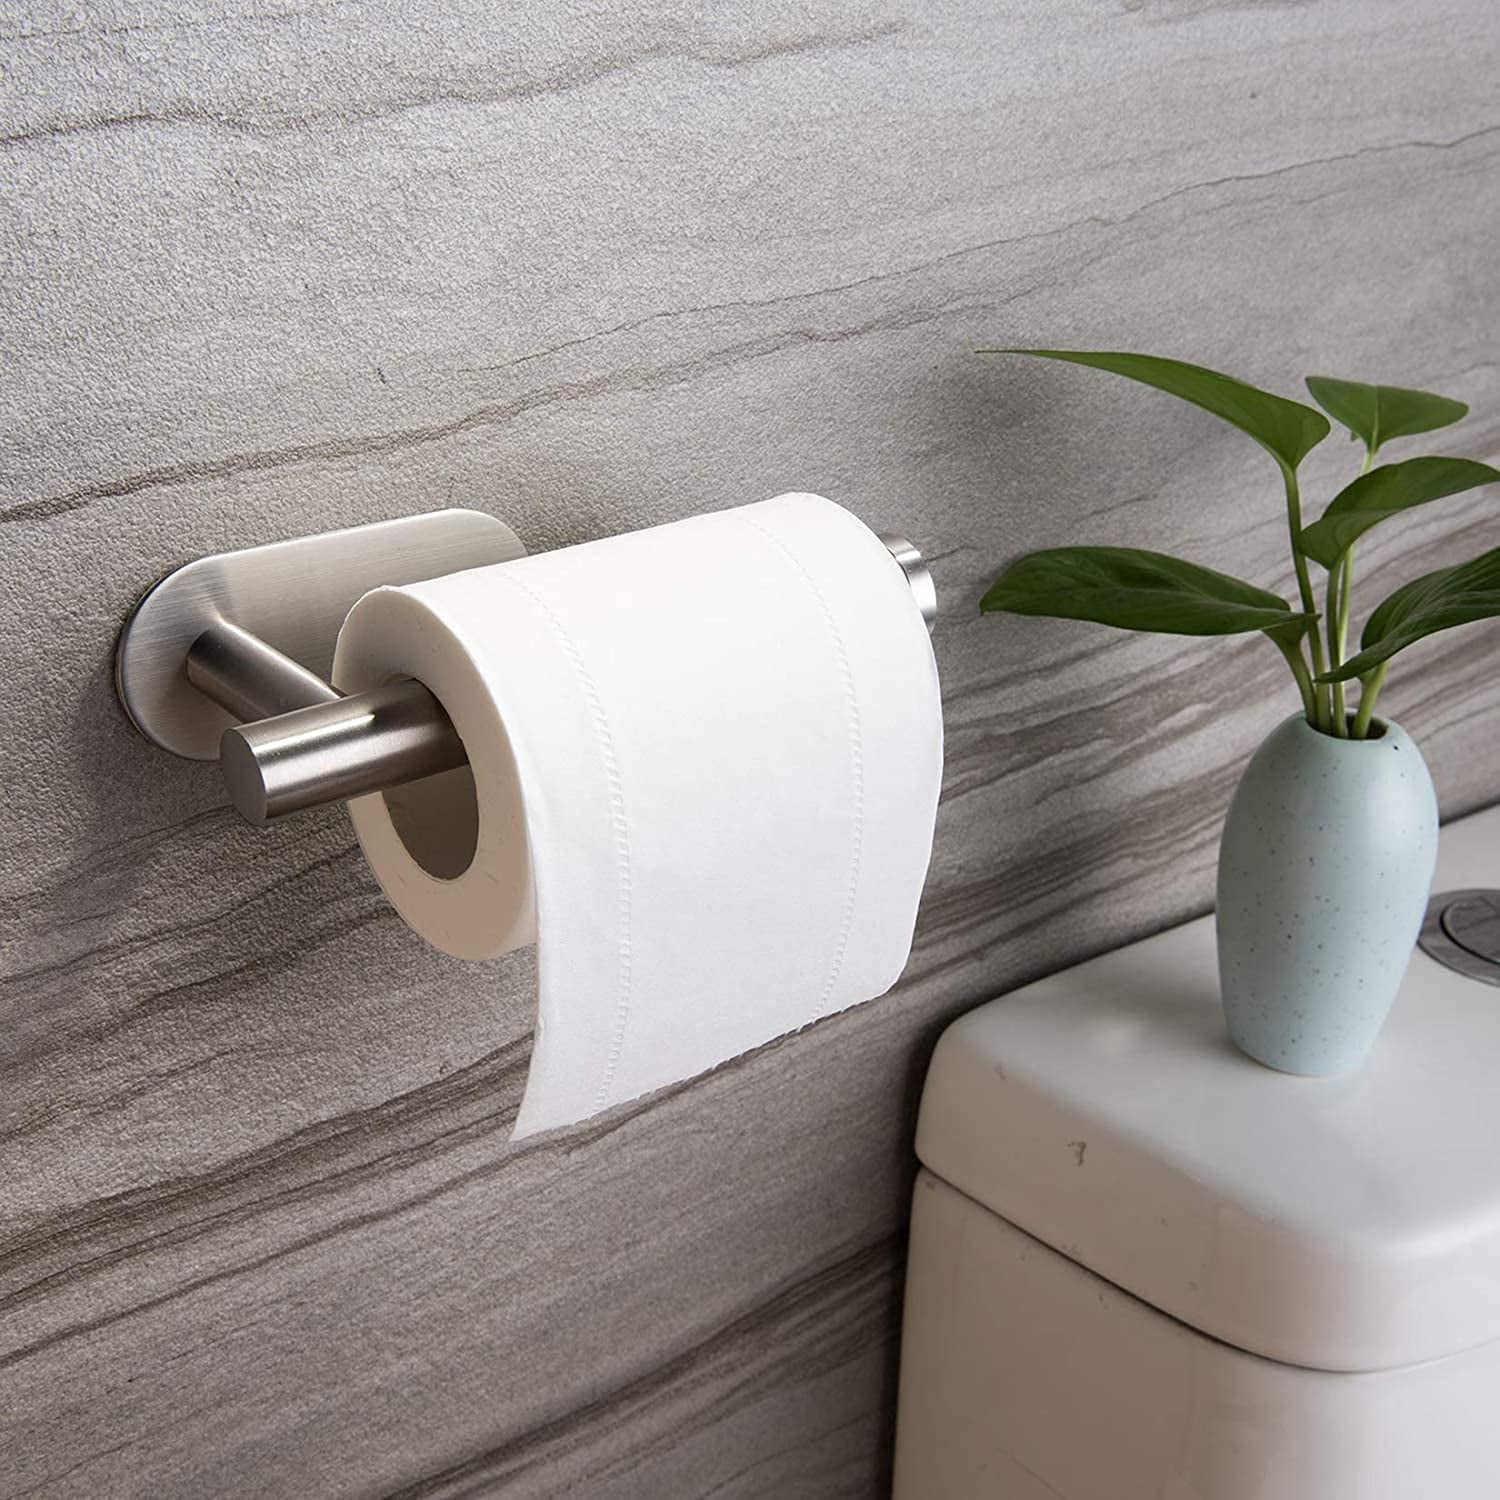 Details about   Self Adhesive Roll Holder Toilet Paper Holder No Drilling Required 